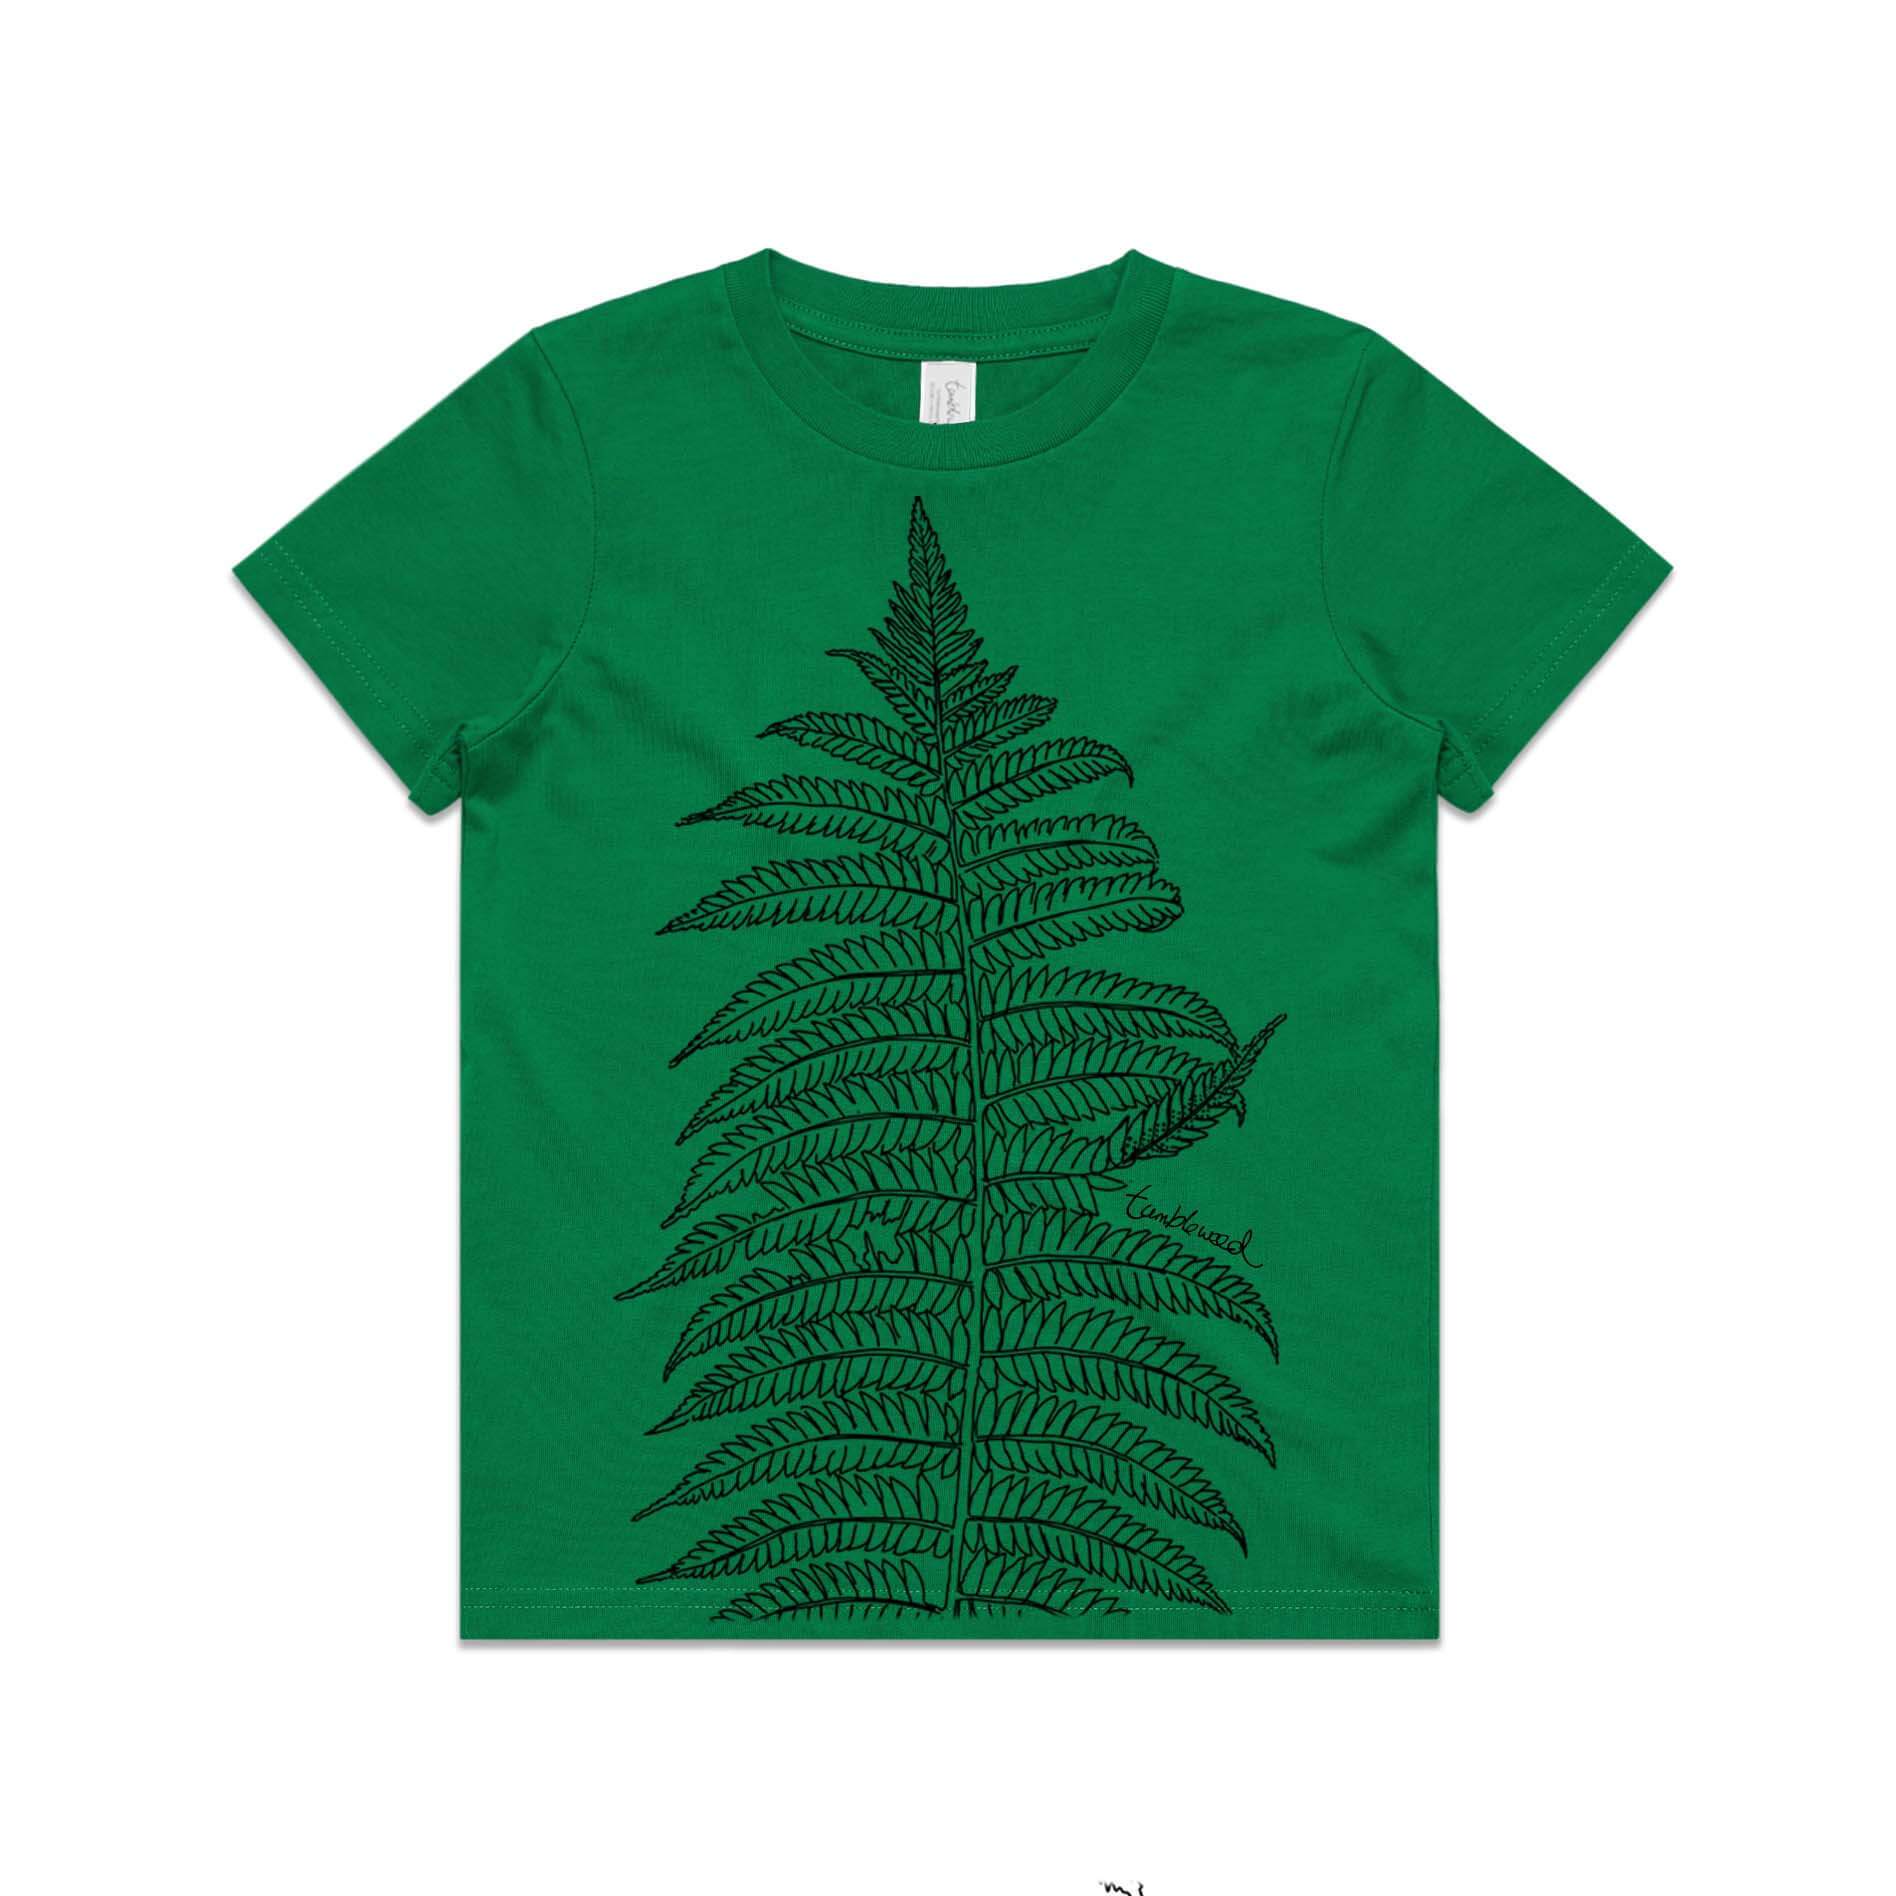 Green, cotton kids' t-shirt with screen printed Silver fern/ponga design.